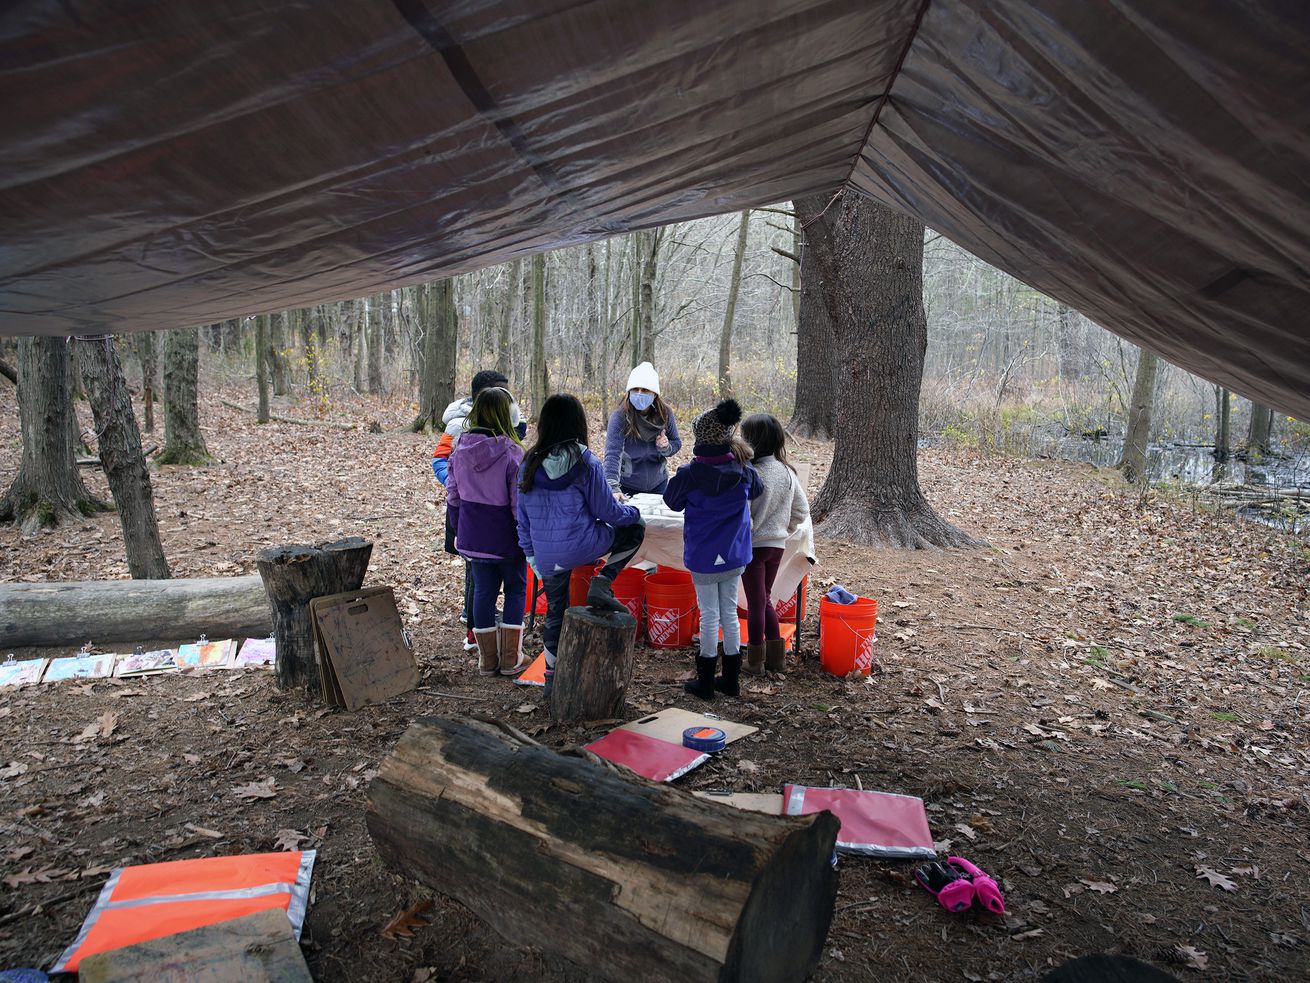 The case for outdoor schooling